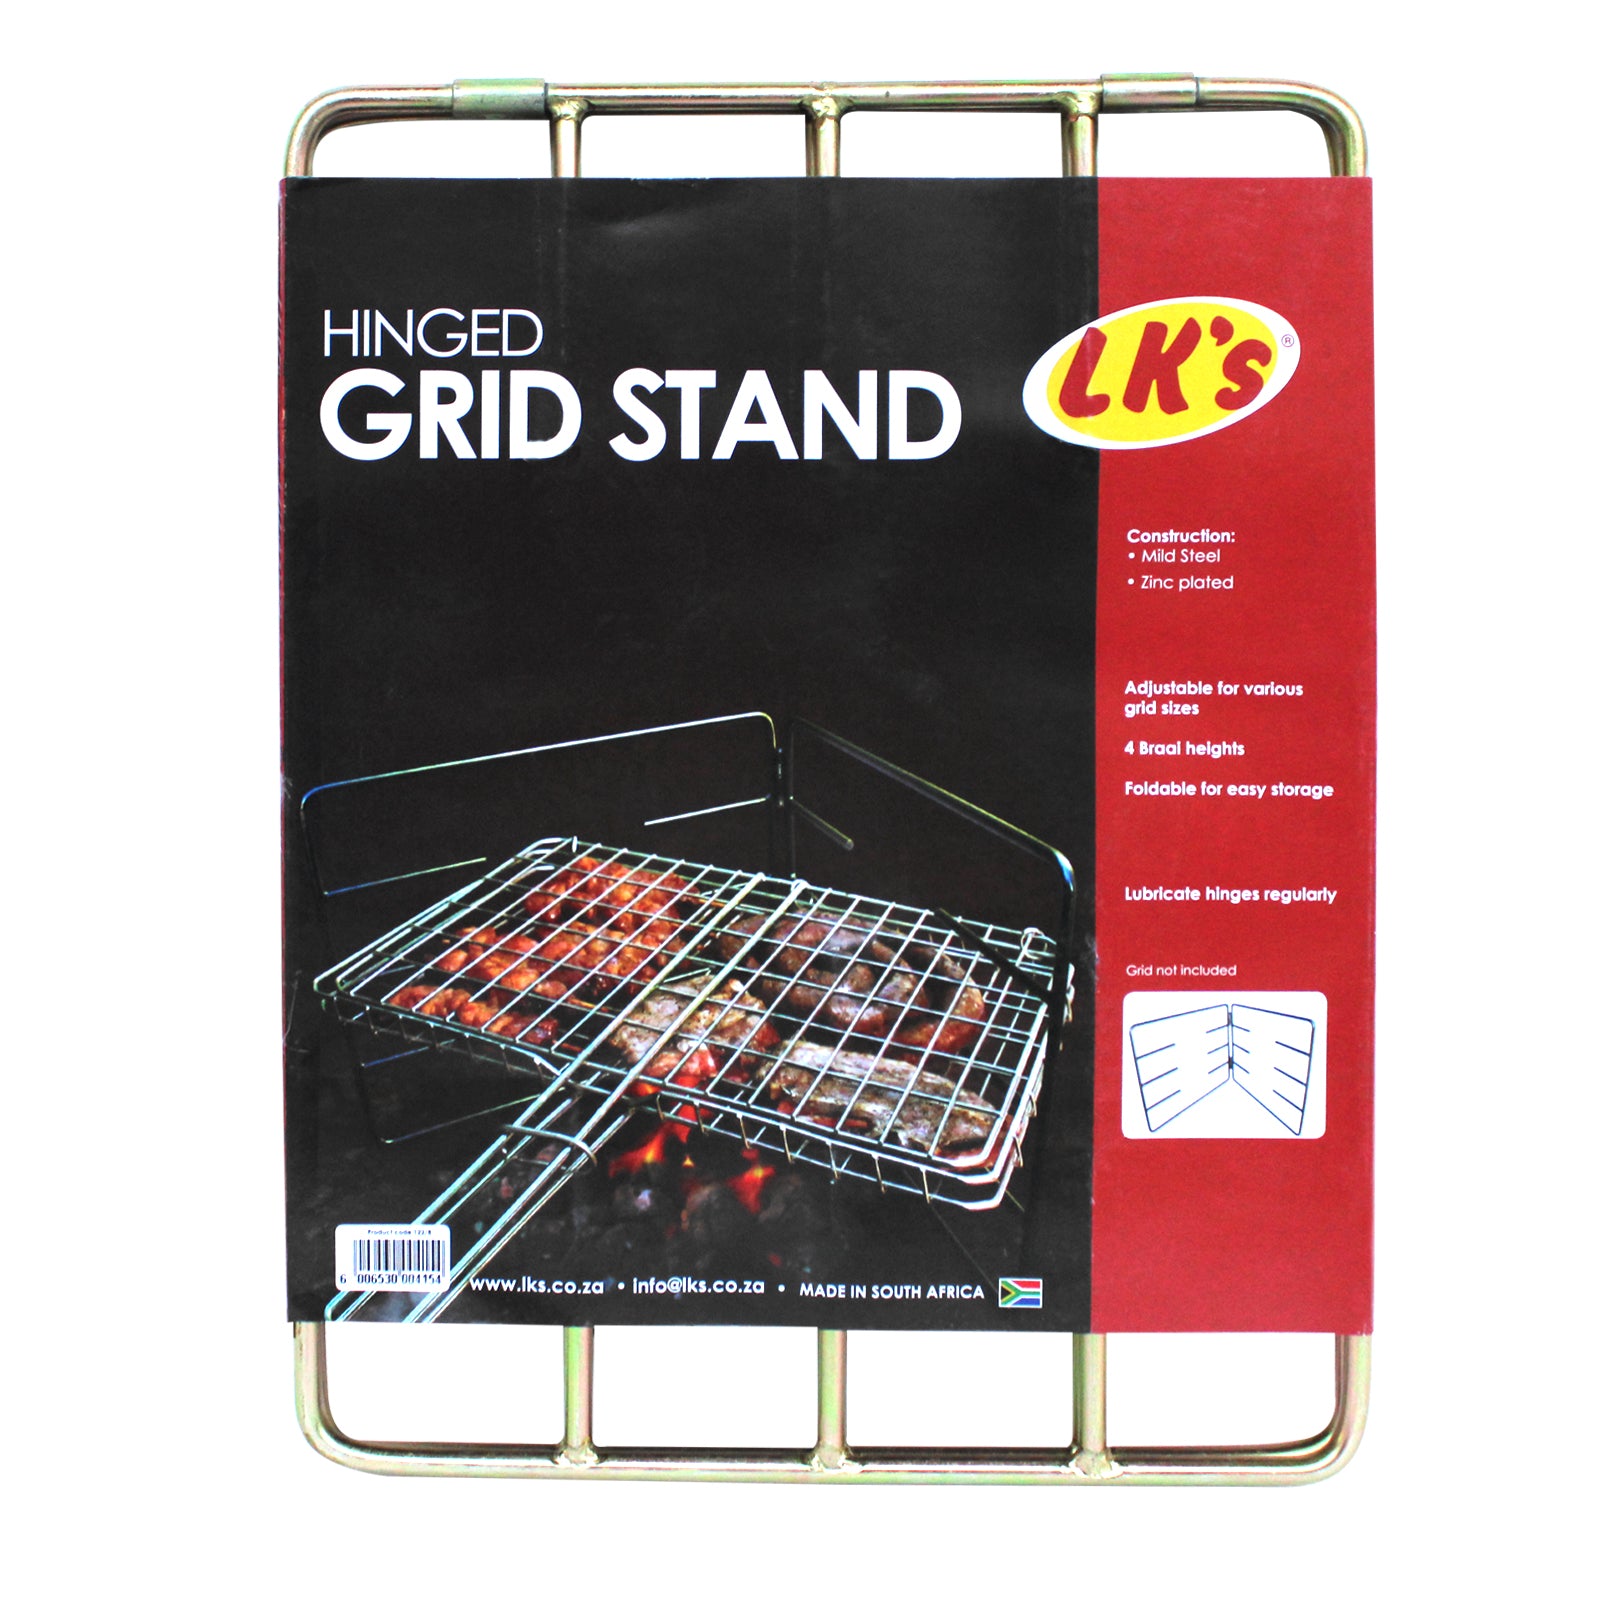 Hinged Grid Stand in Packaging